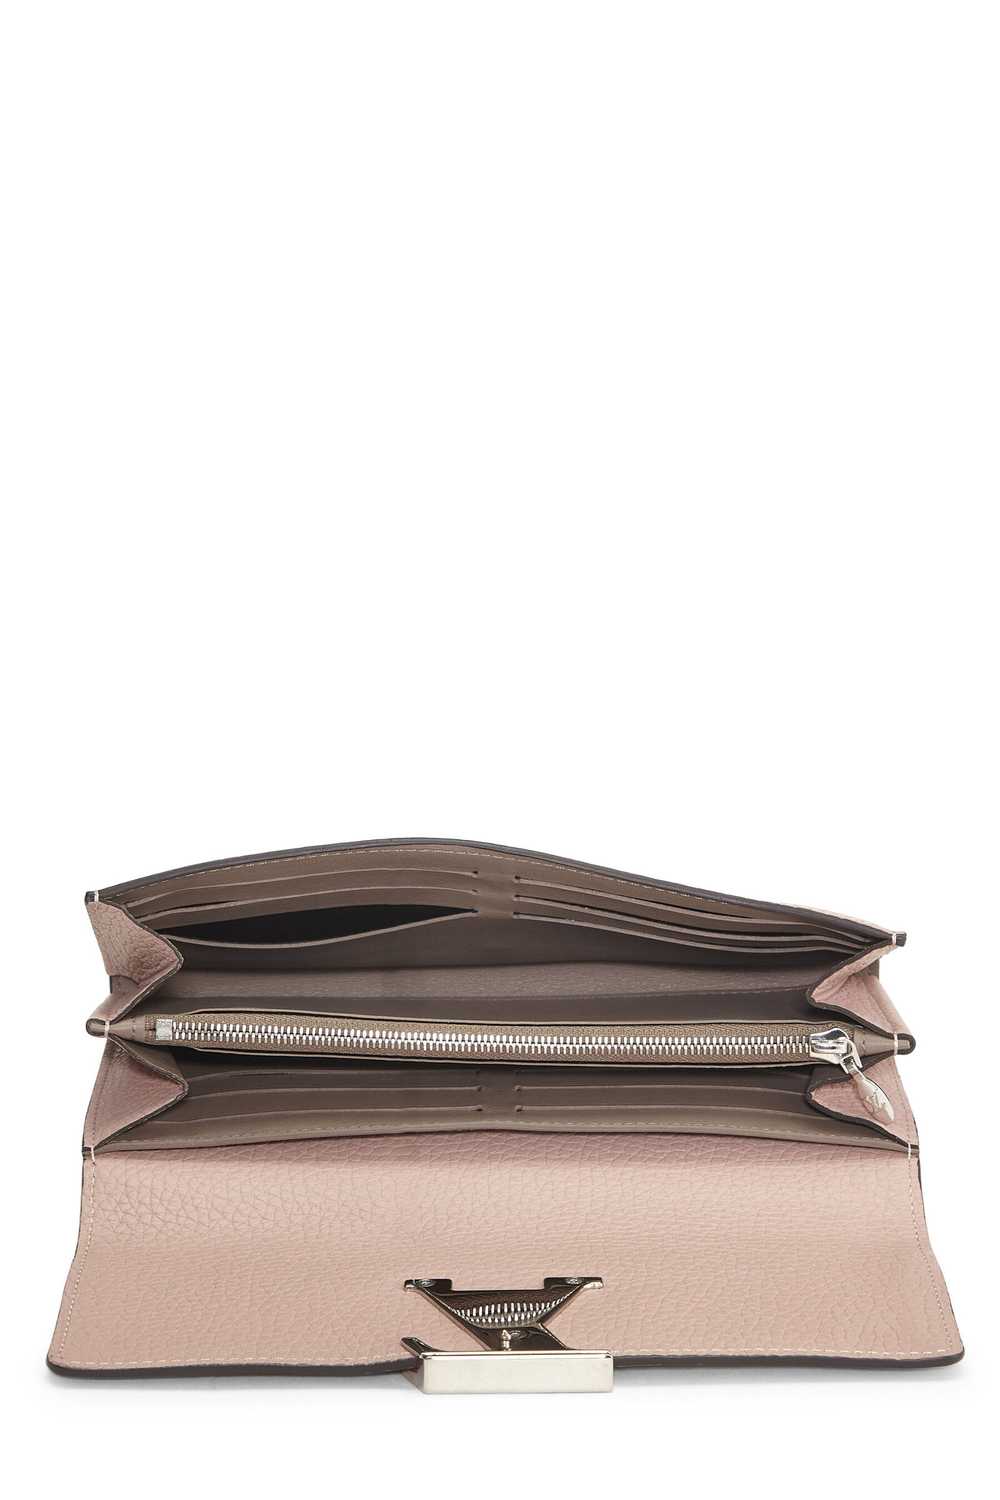 Pink Taurillon Leather Capucines Wallet - image 4